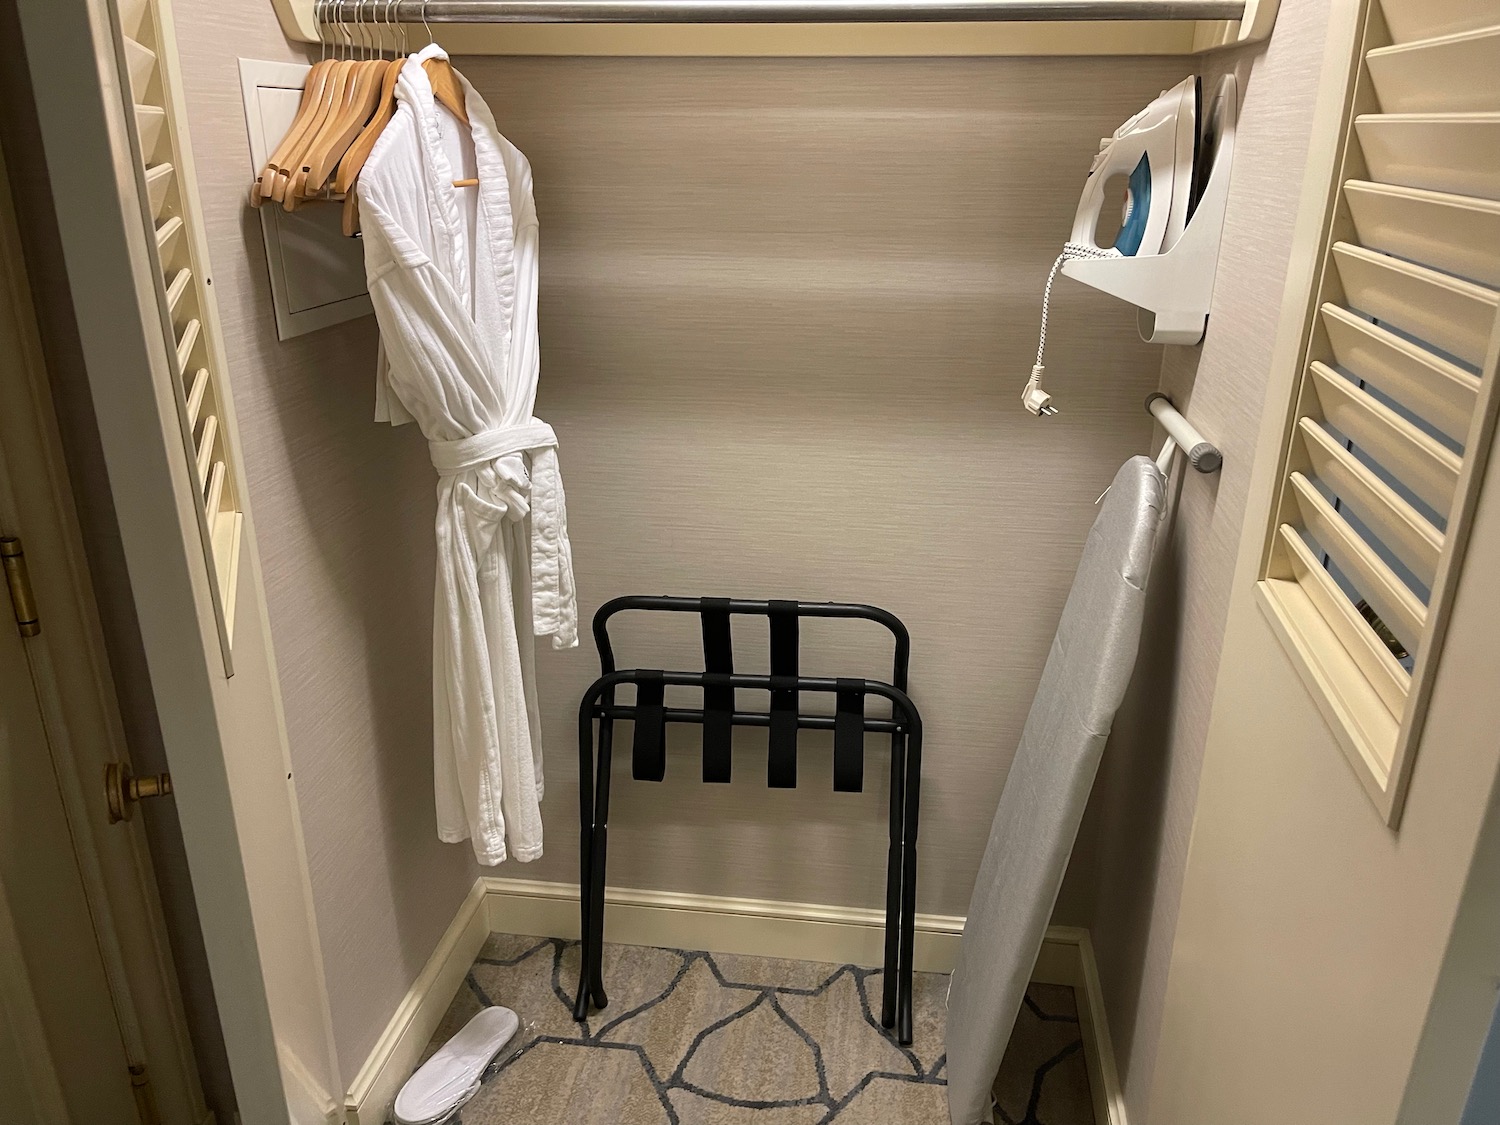 a white robe on a swinger in a closet